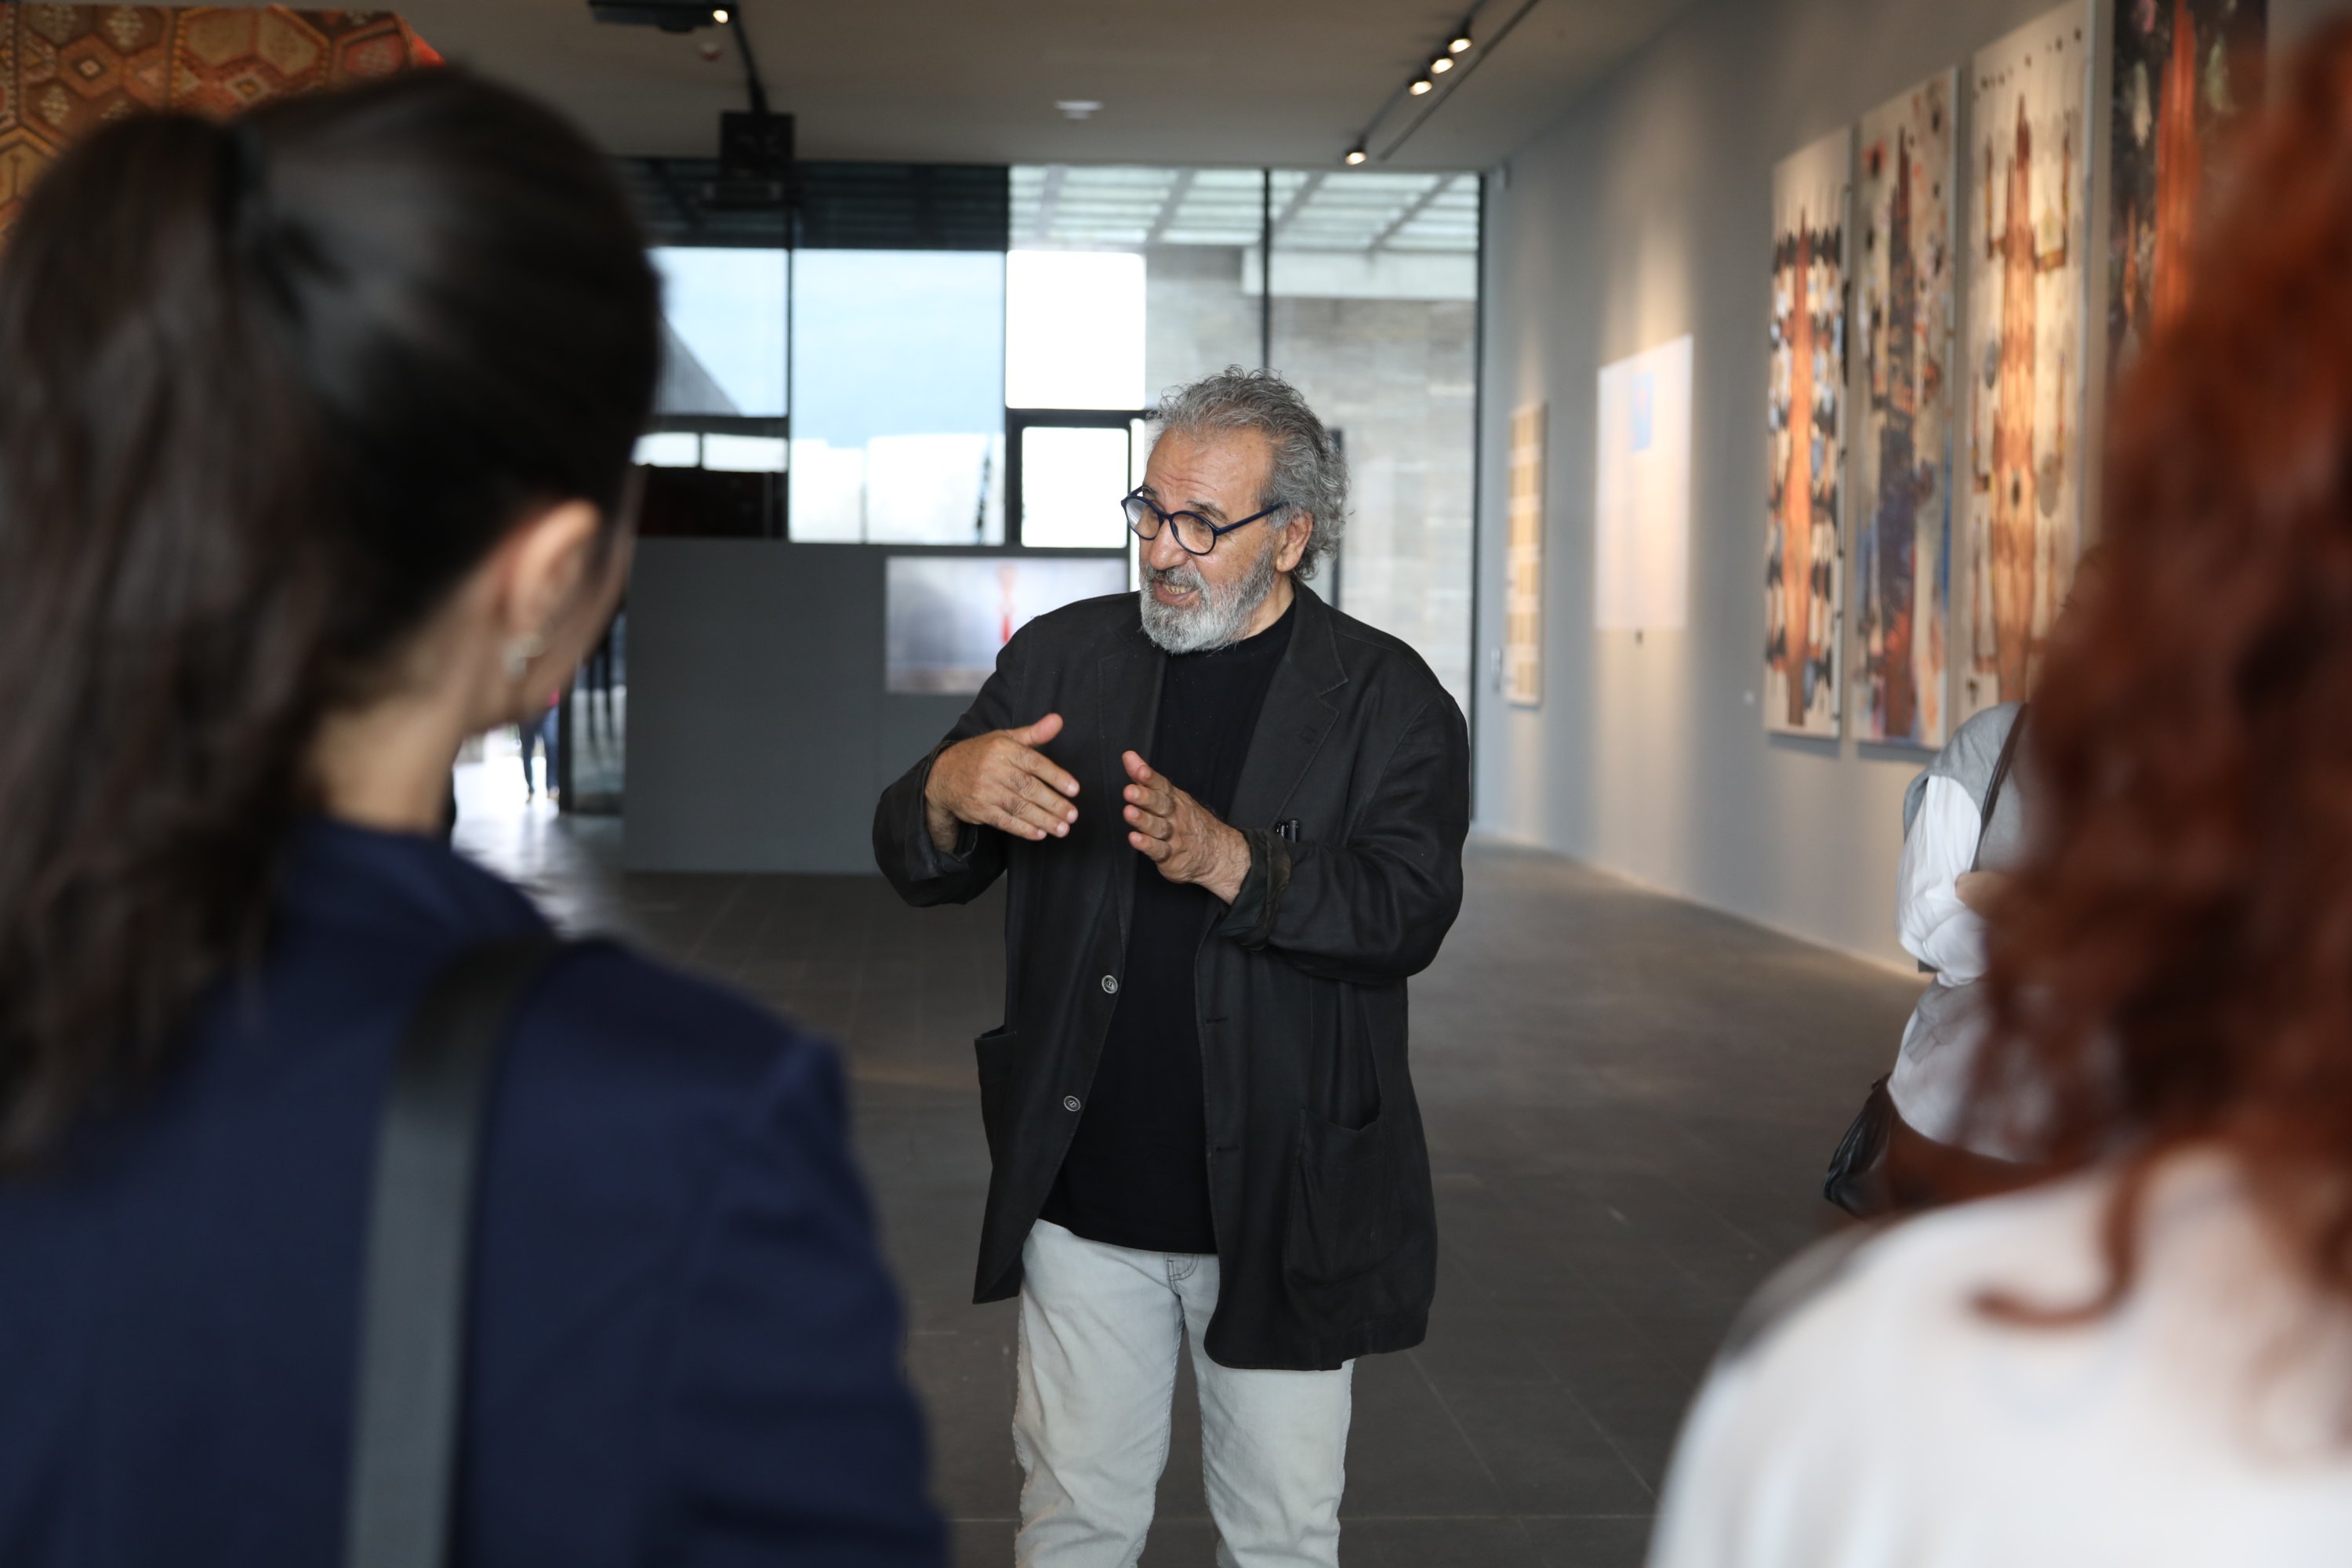 Hüsamettin Koçan will provide guided tours for his 'The Thorn in My Foot' at Atatürk Cultural Center, Istanbul. (Courtesy of AKM) 